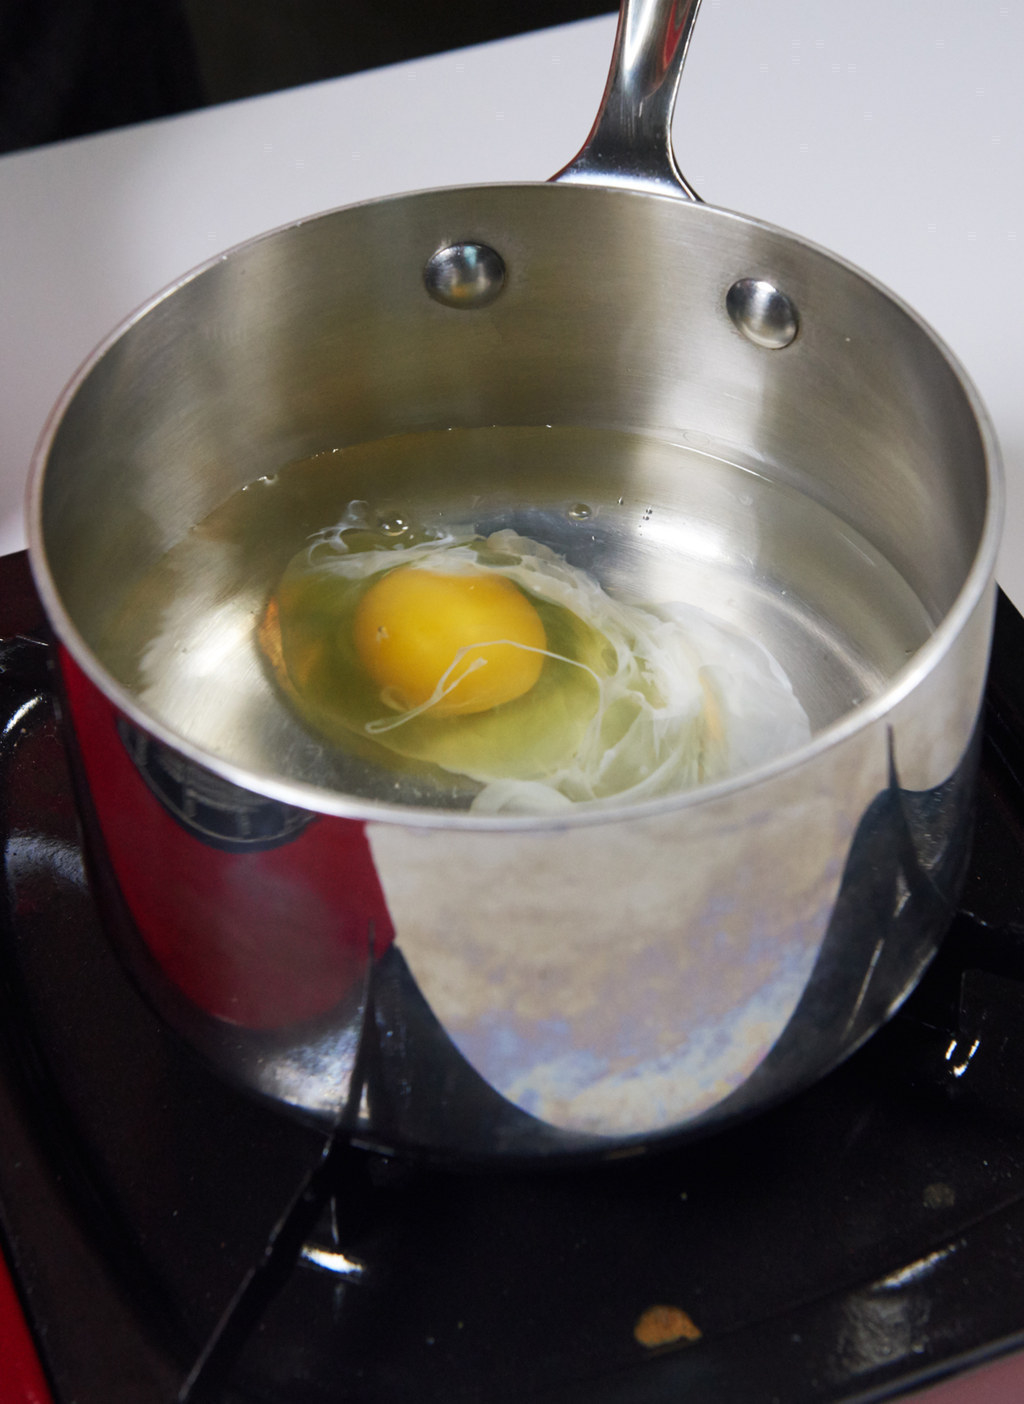 An egg being poached in a pot